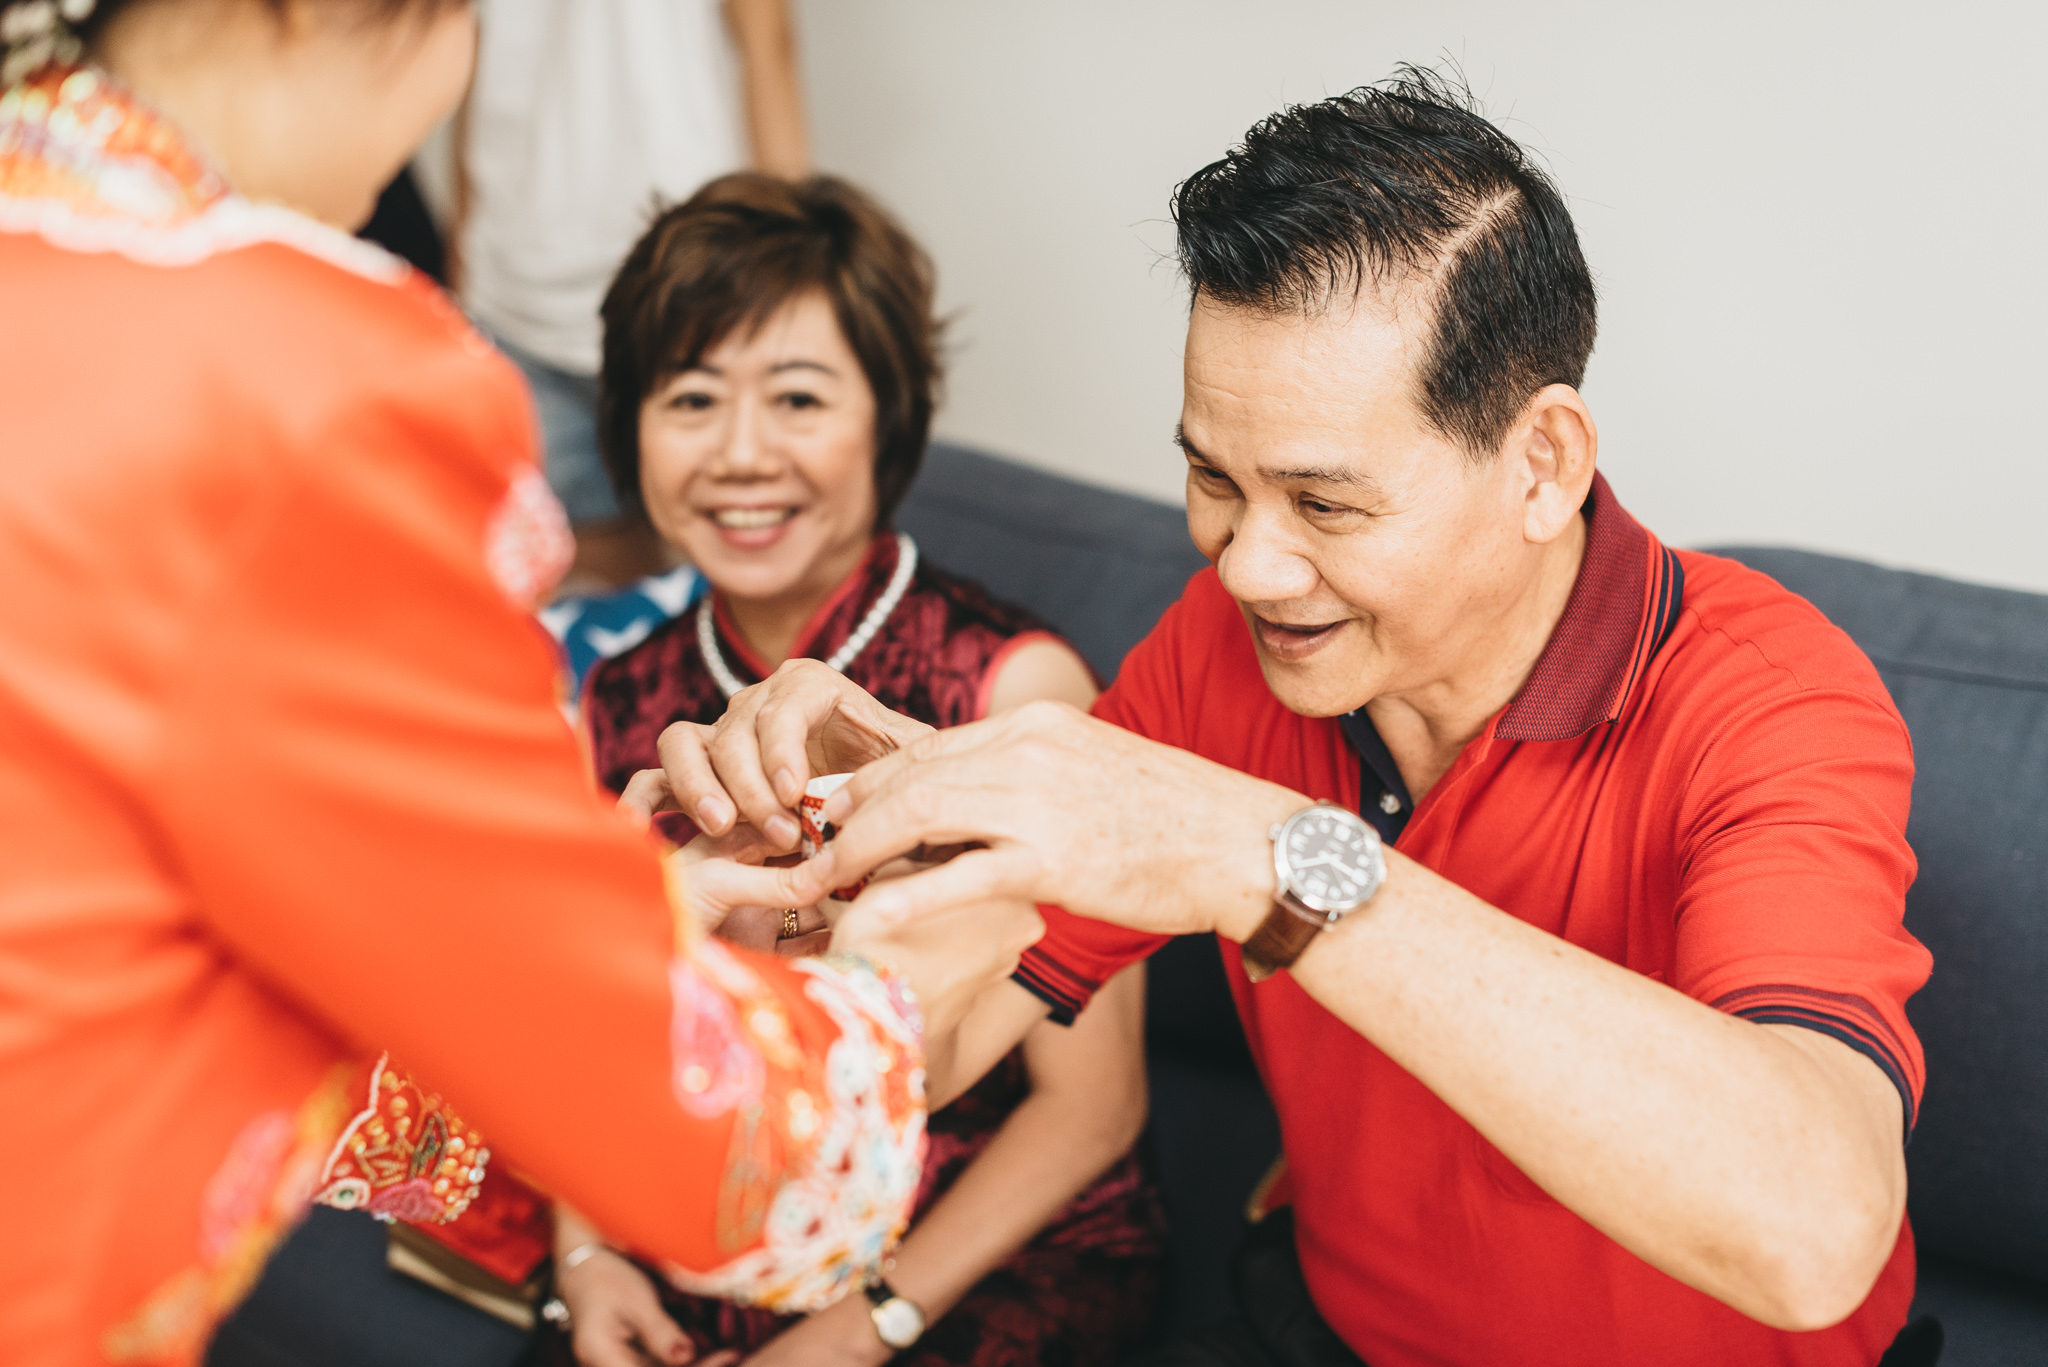 Alice & Wei Bang Wedding Day Highlights (resized for sharing) - 062.jpg